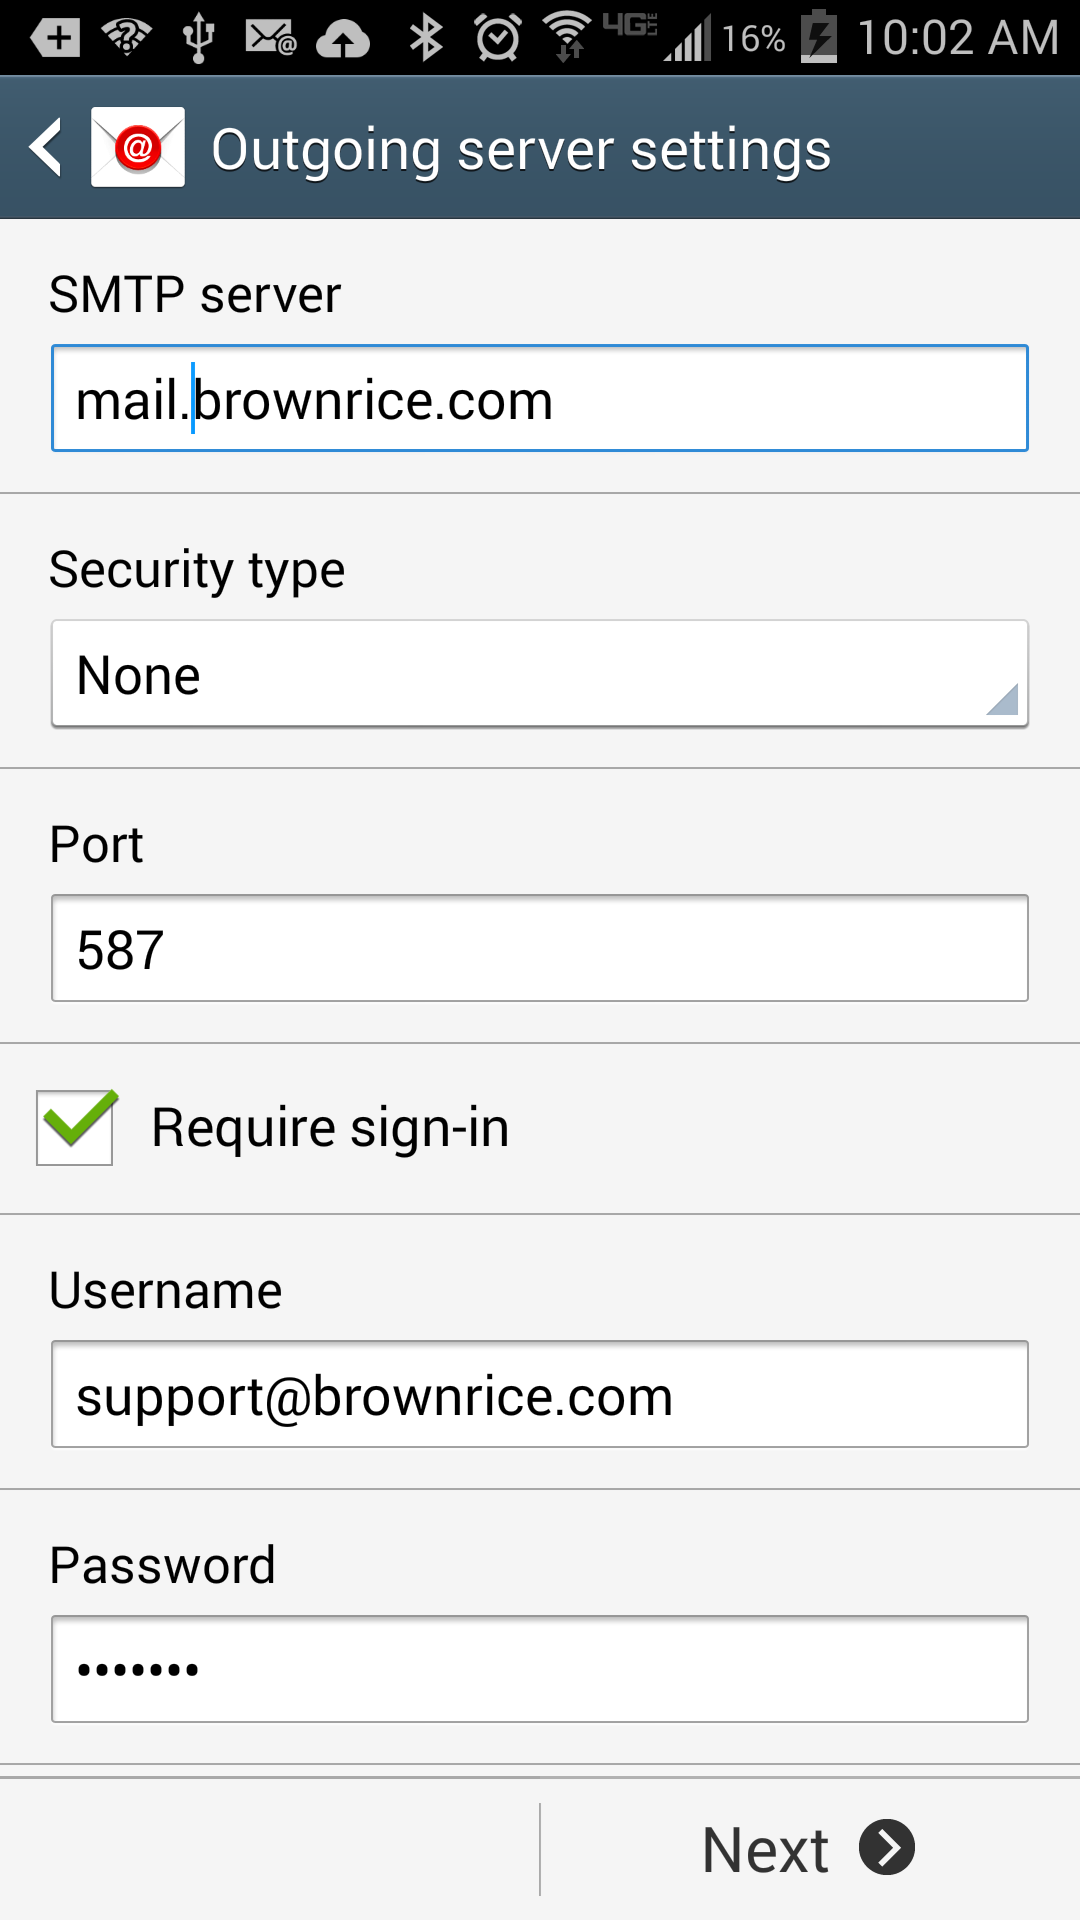 Outgoing Server Settings - SMTP Server: mail.brownrice.com; Port: 587; Security Type: None; Require Sign In: YES.